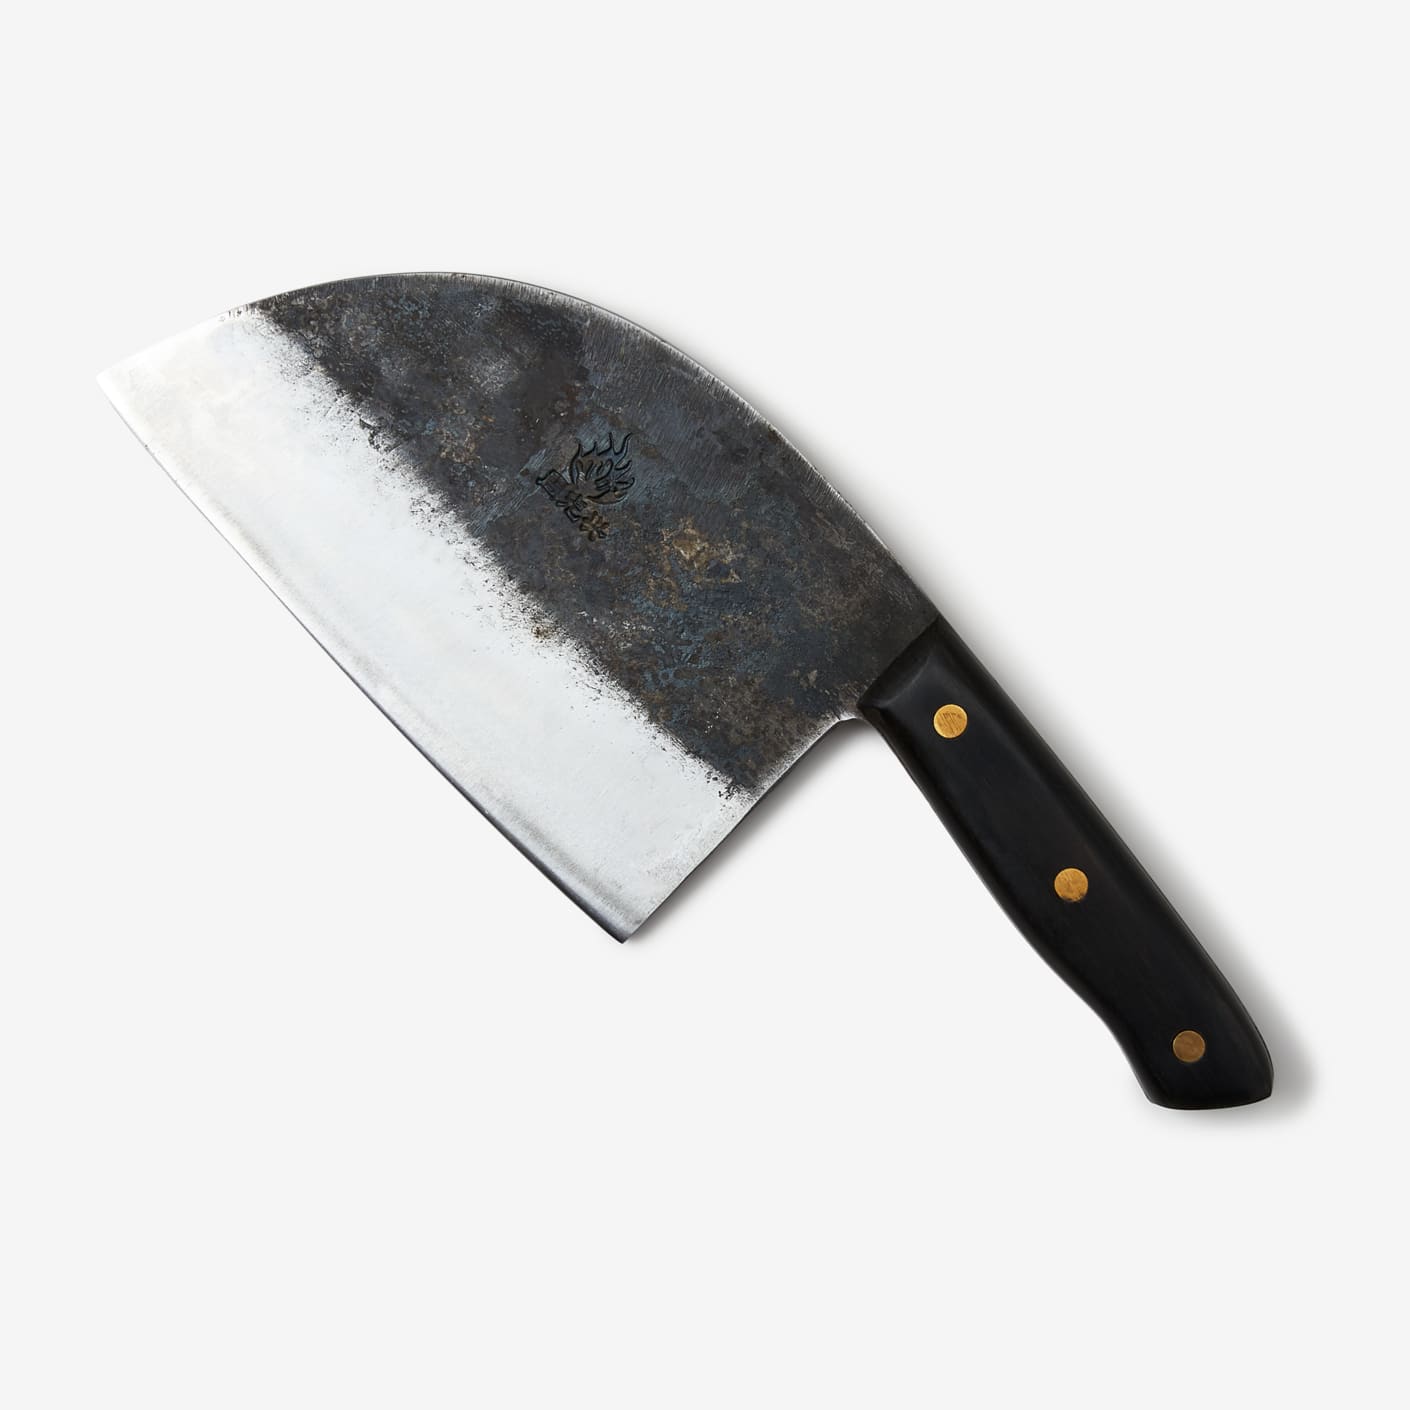 https://dam.bespokepost.com/image/upload/c_limit,dpr_auto,f_auto,q_auto,w_1410/v1/Storefront/2022%20/07-July/in-house/vertoku-full-tang-serbian-steel-knife_1